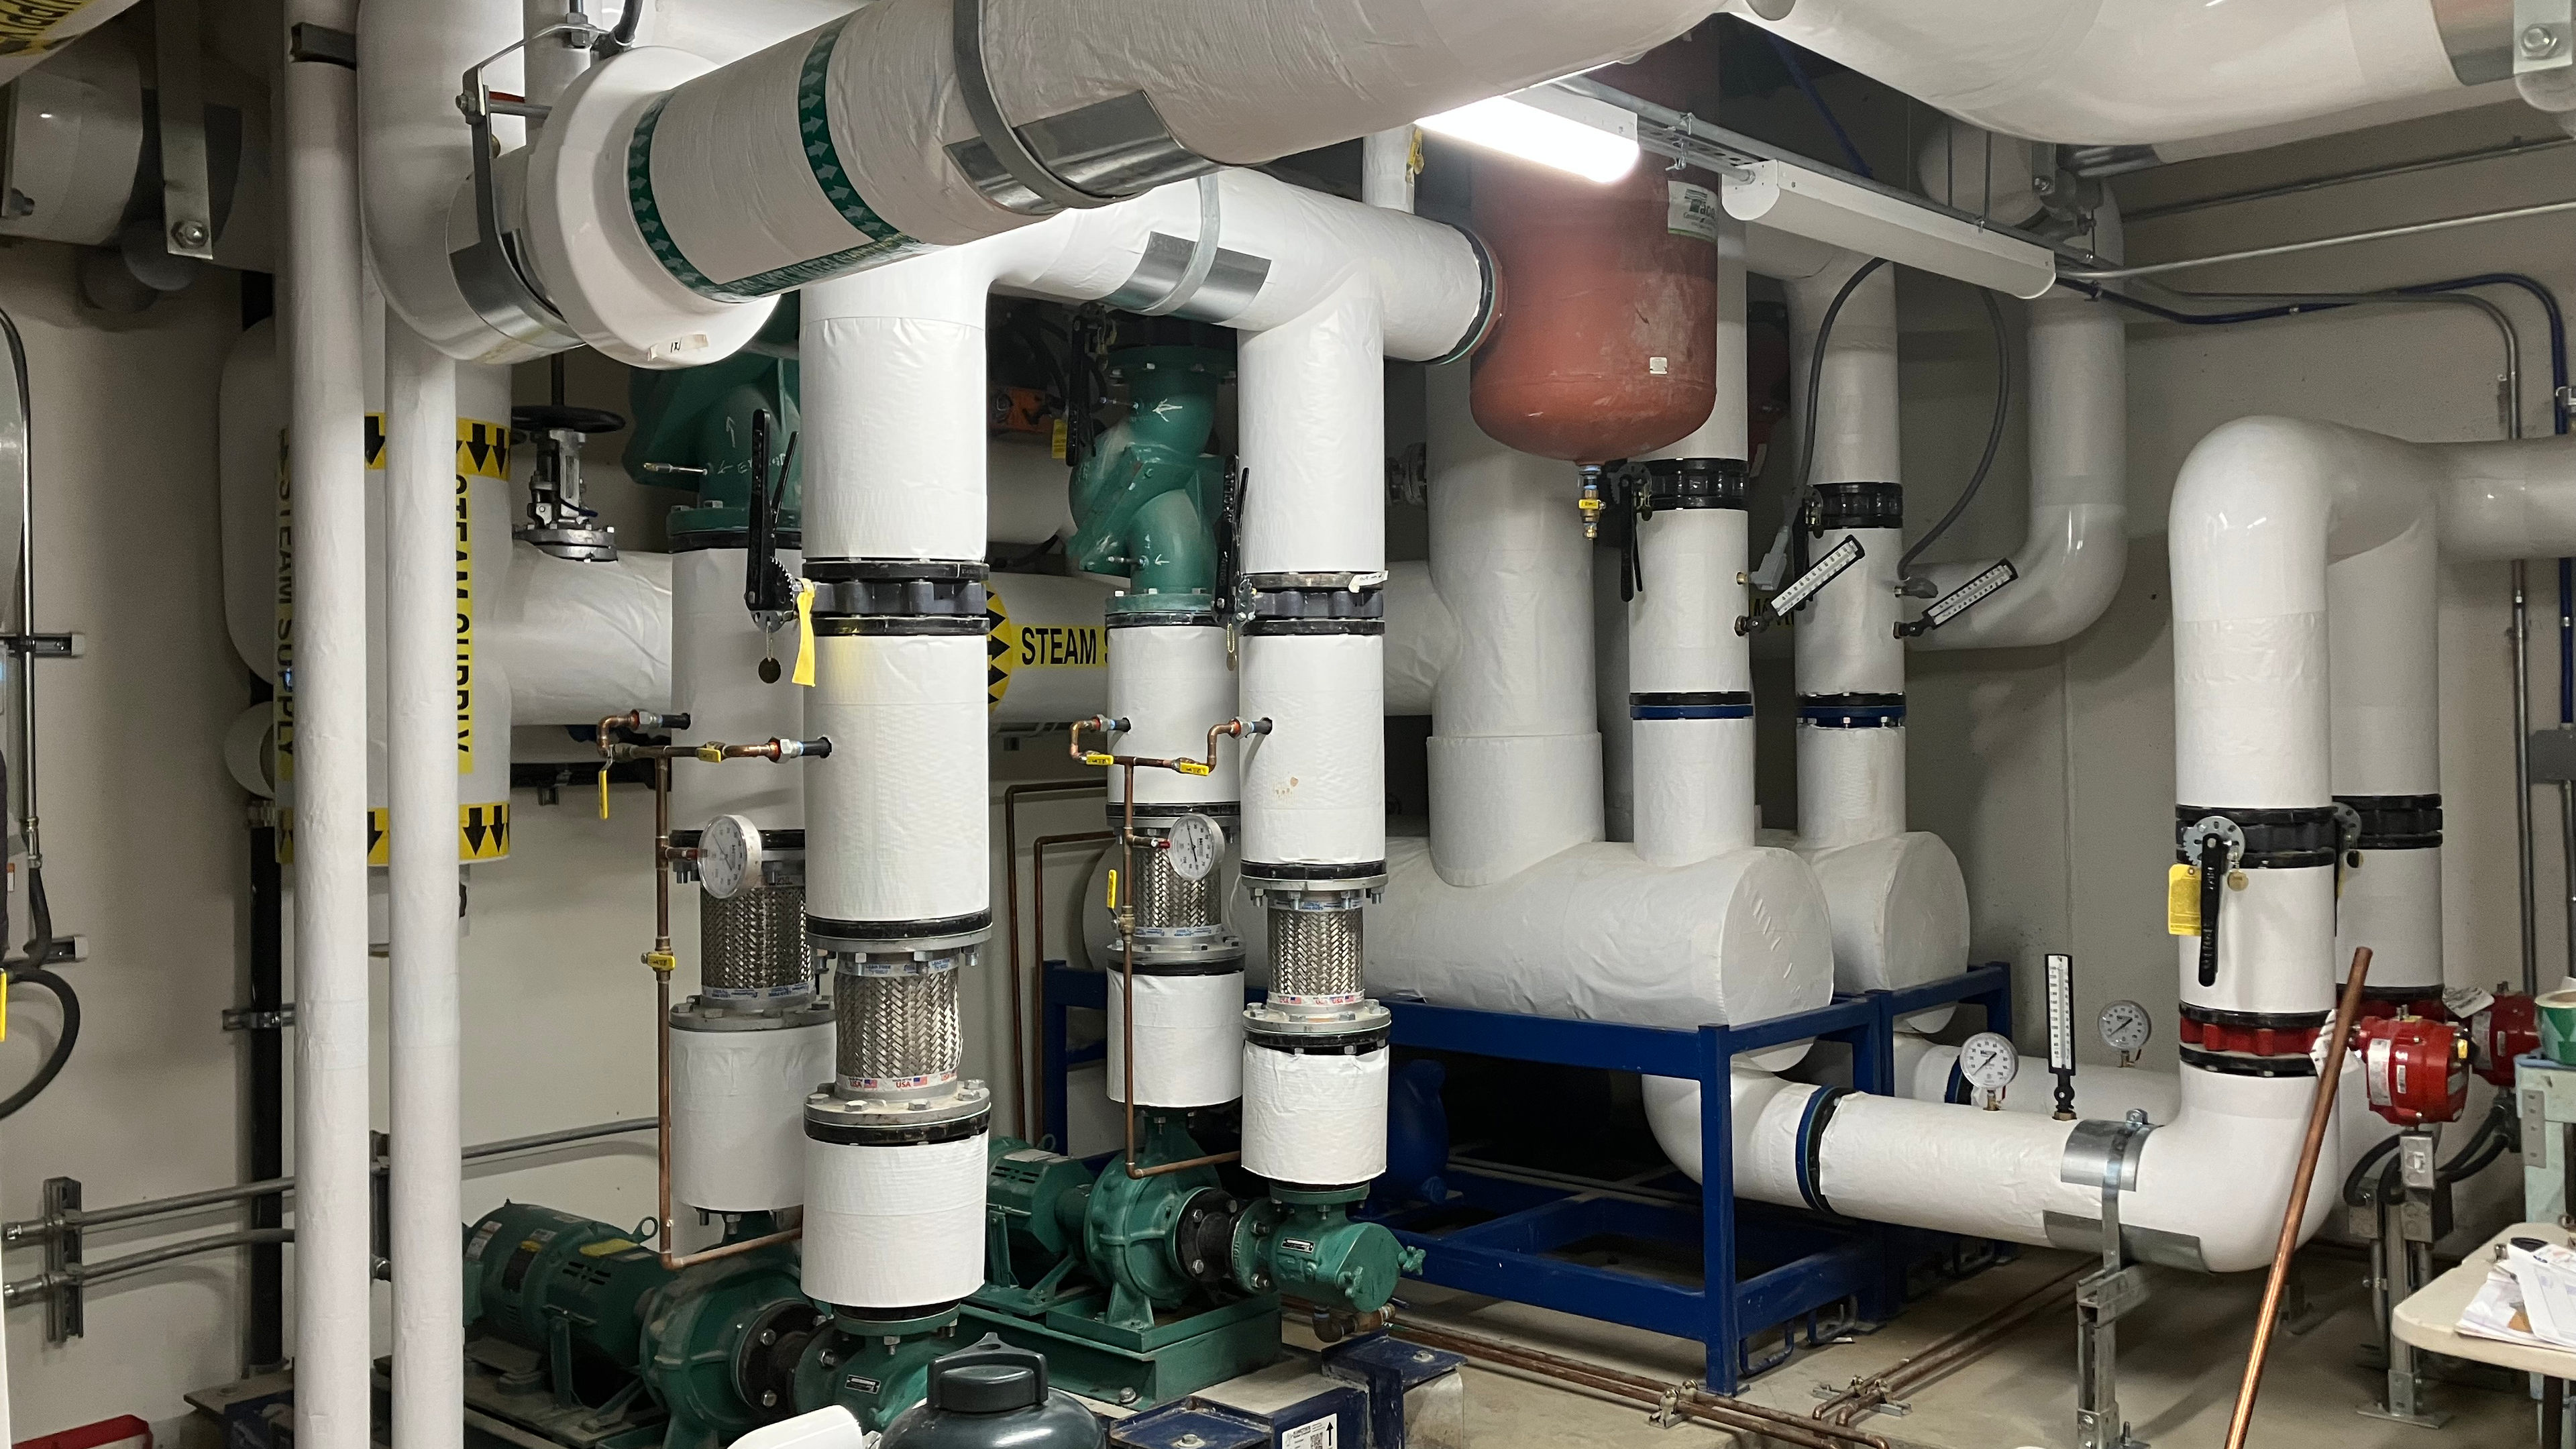 Alpha Mechanical’s steam heat exchanger portion of an HVAC system at a Veterans Affairs facility in Long Beach, California.